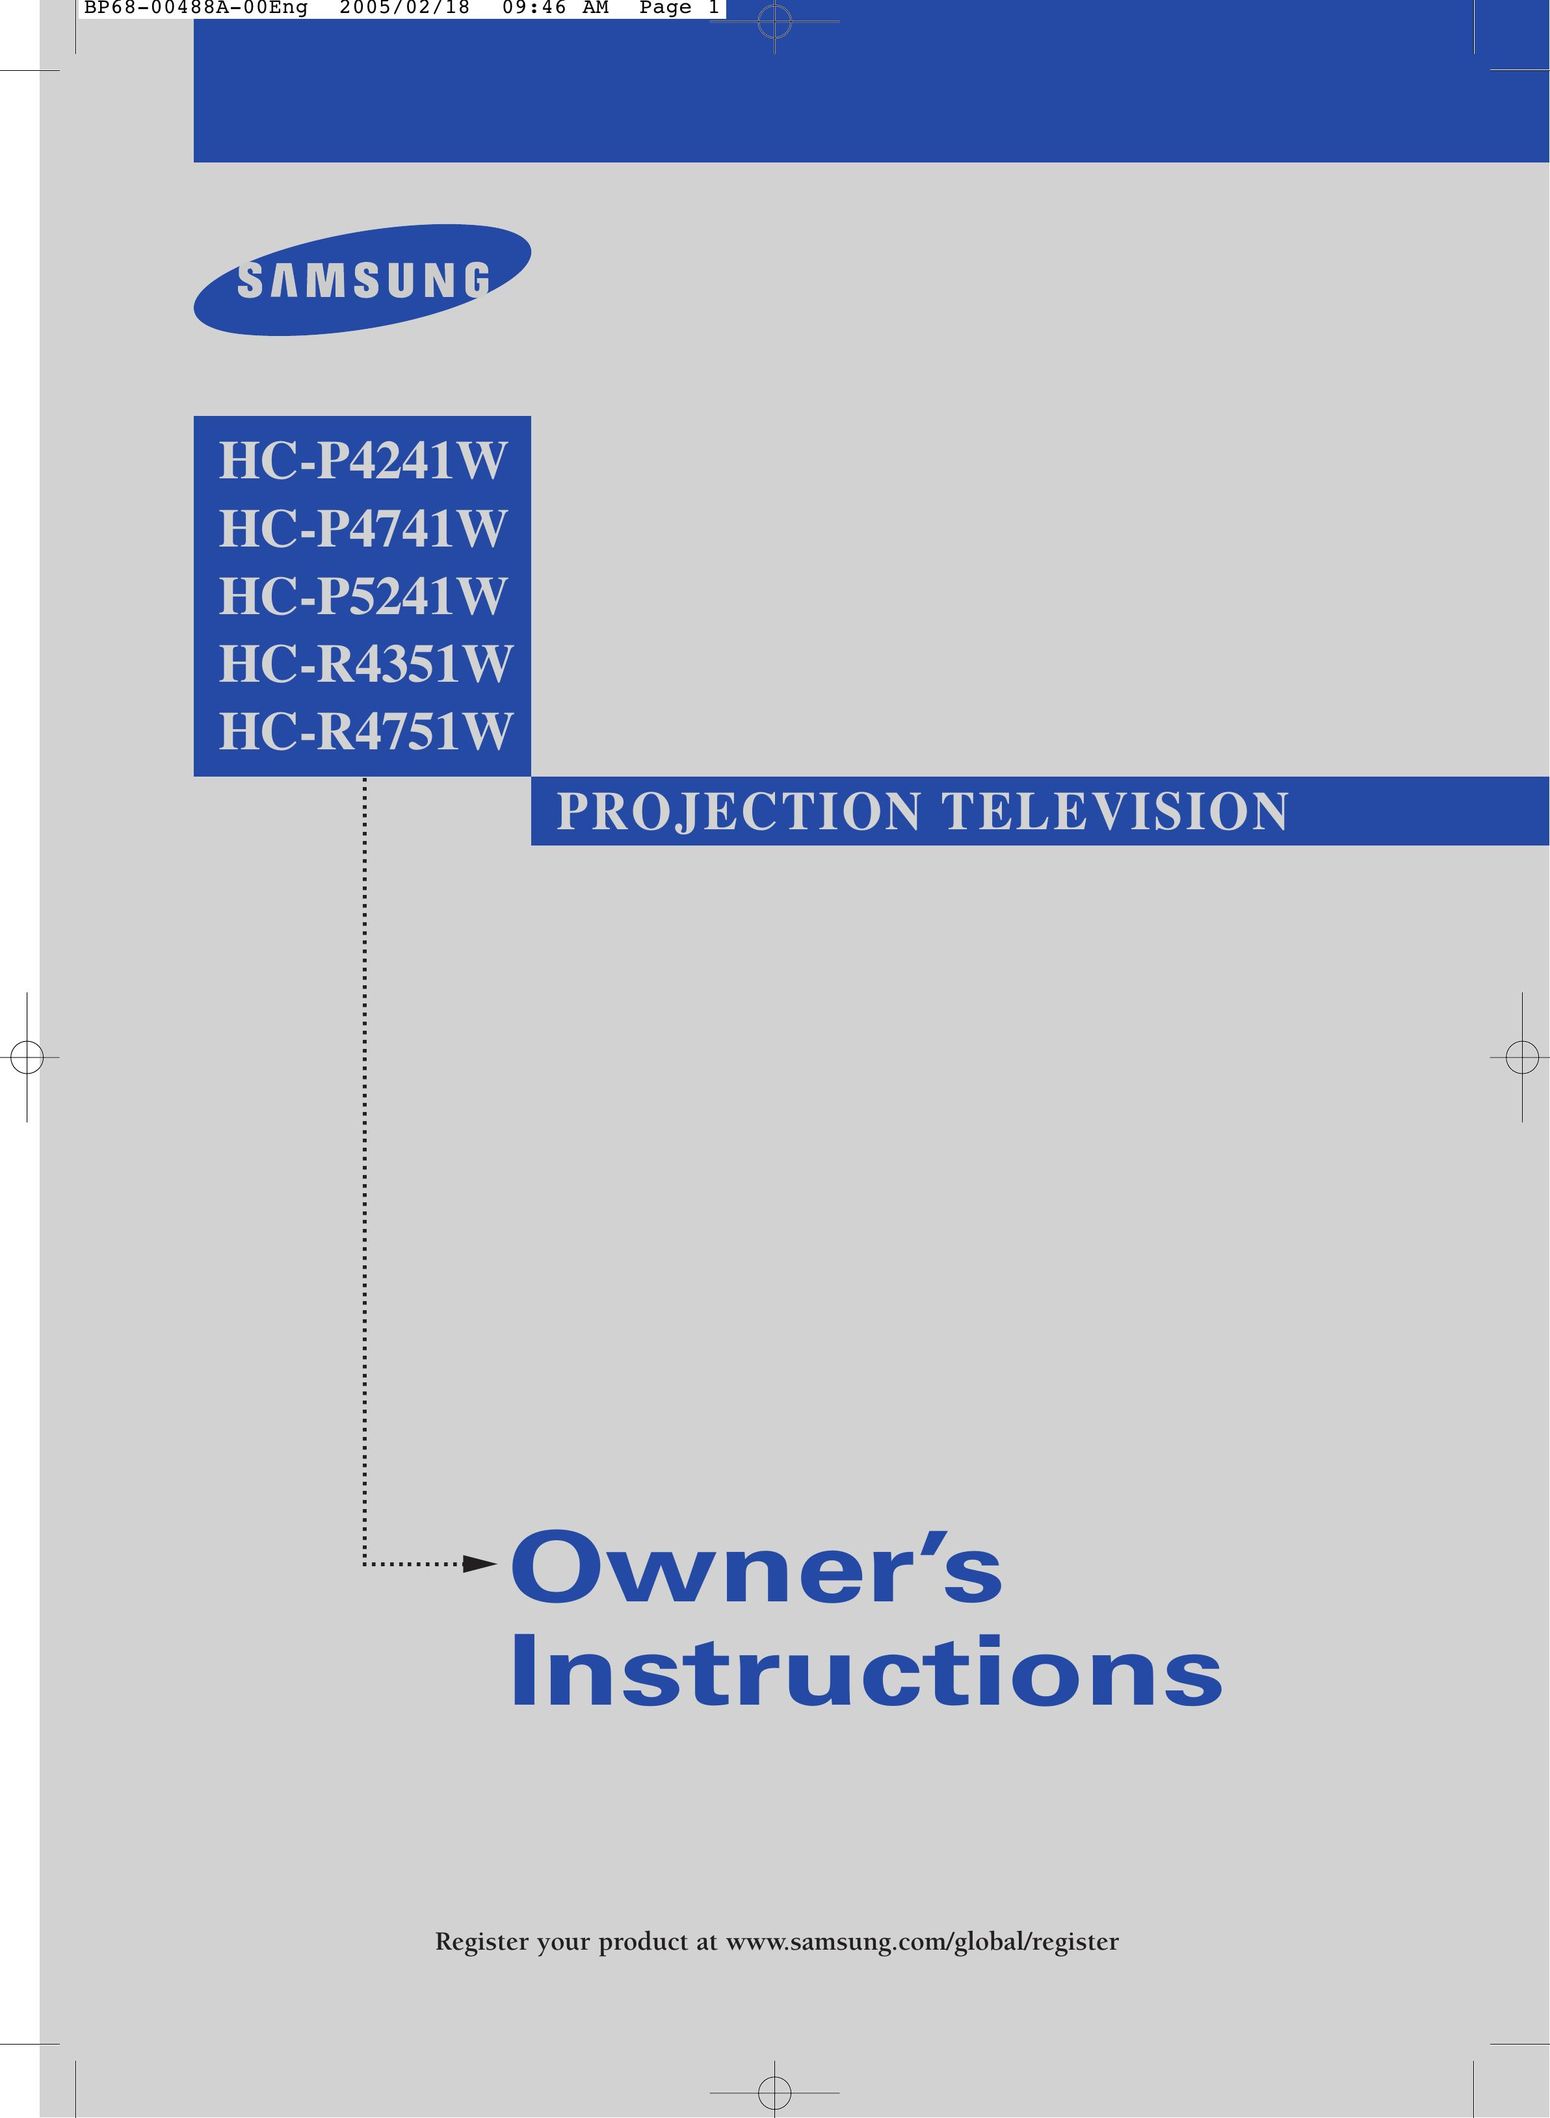 Samsung HC-P4241W Projection Television User Manual